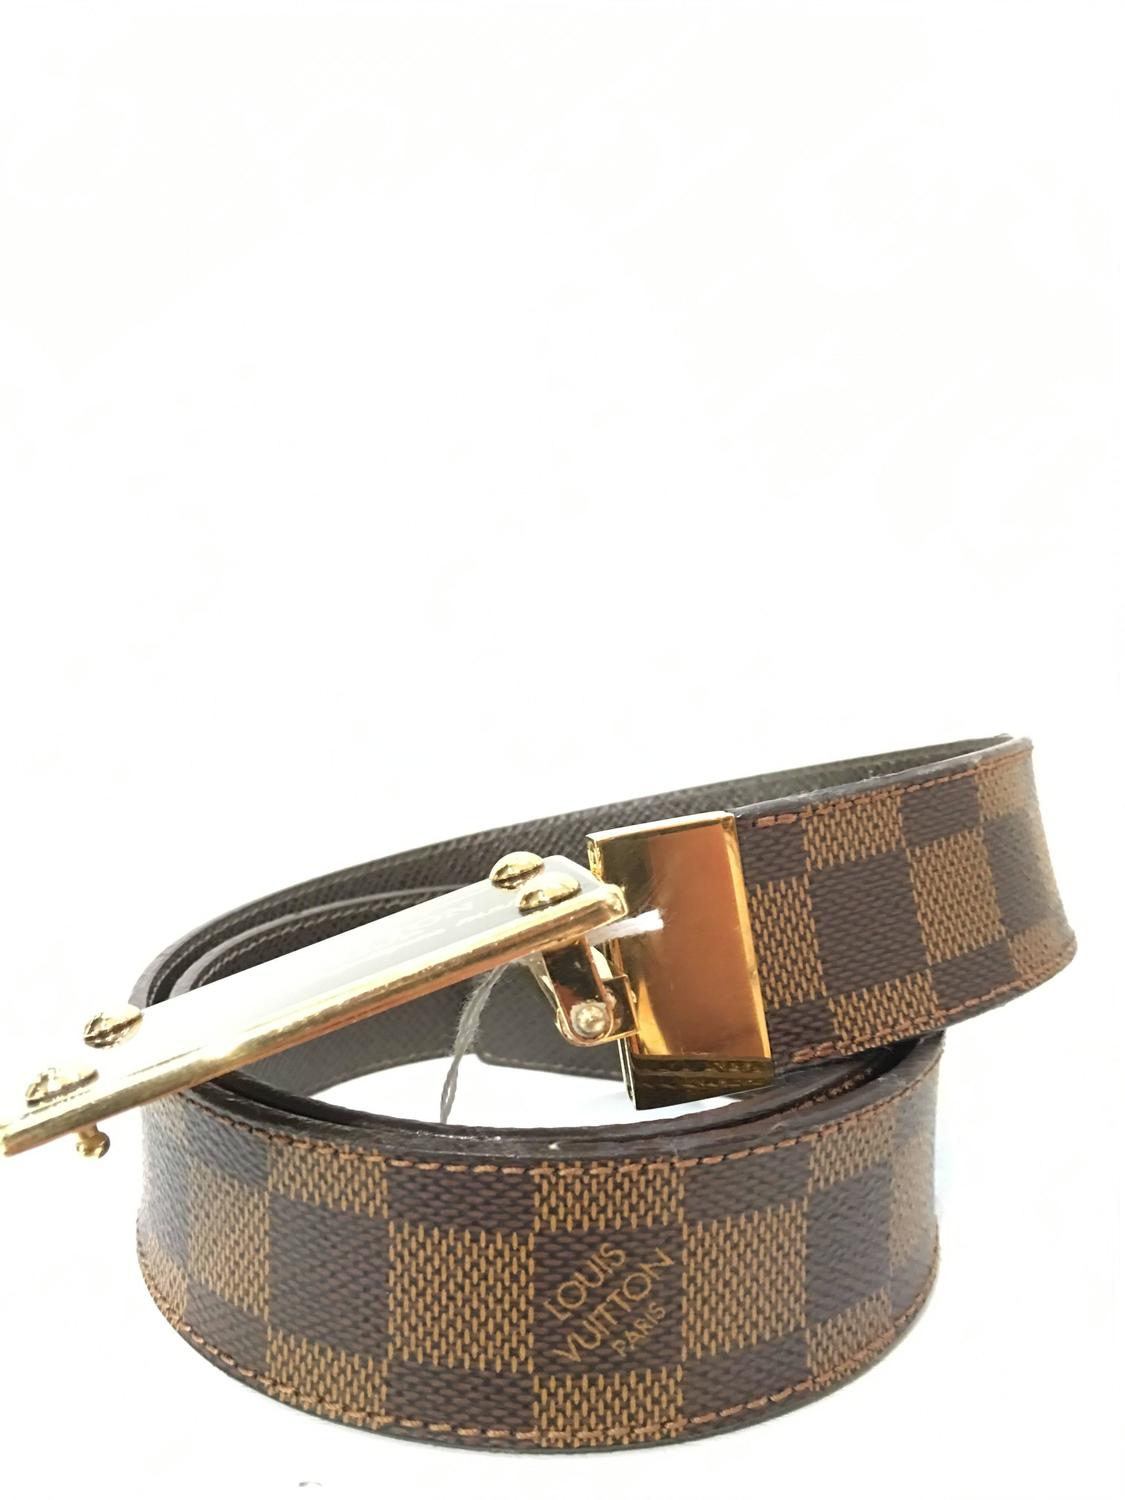 Louis Vuitton Inventeur Belt White | Confederated Tribes of the Umatilla Indian Reservation